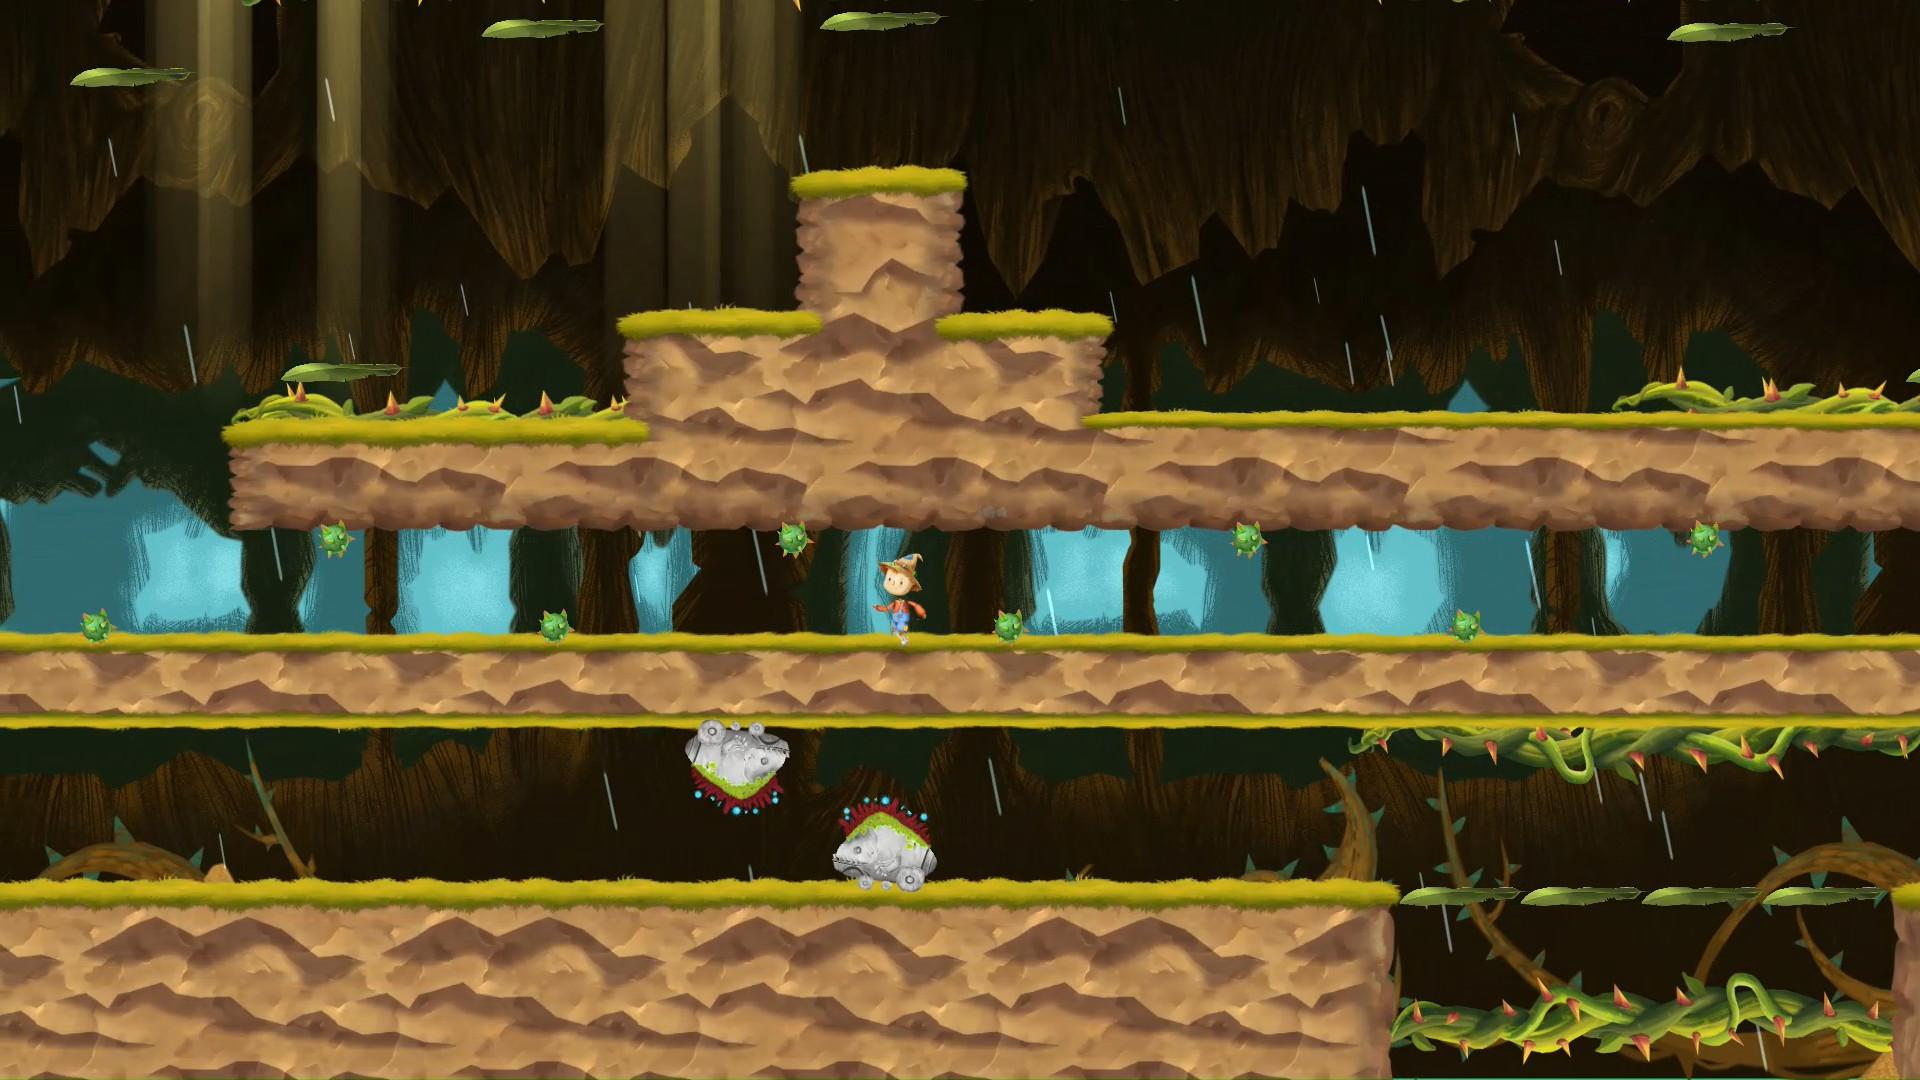 Screenshot №5 from game Upside Down